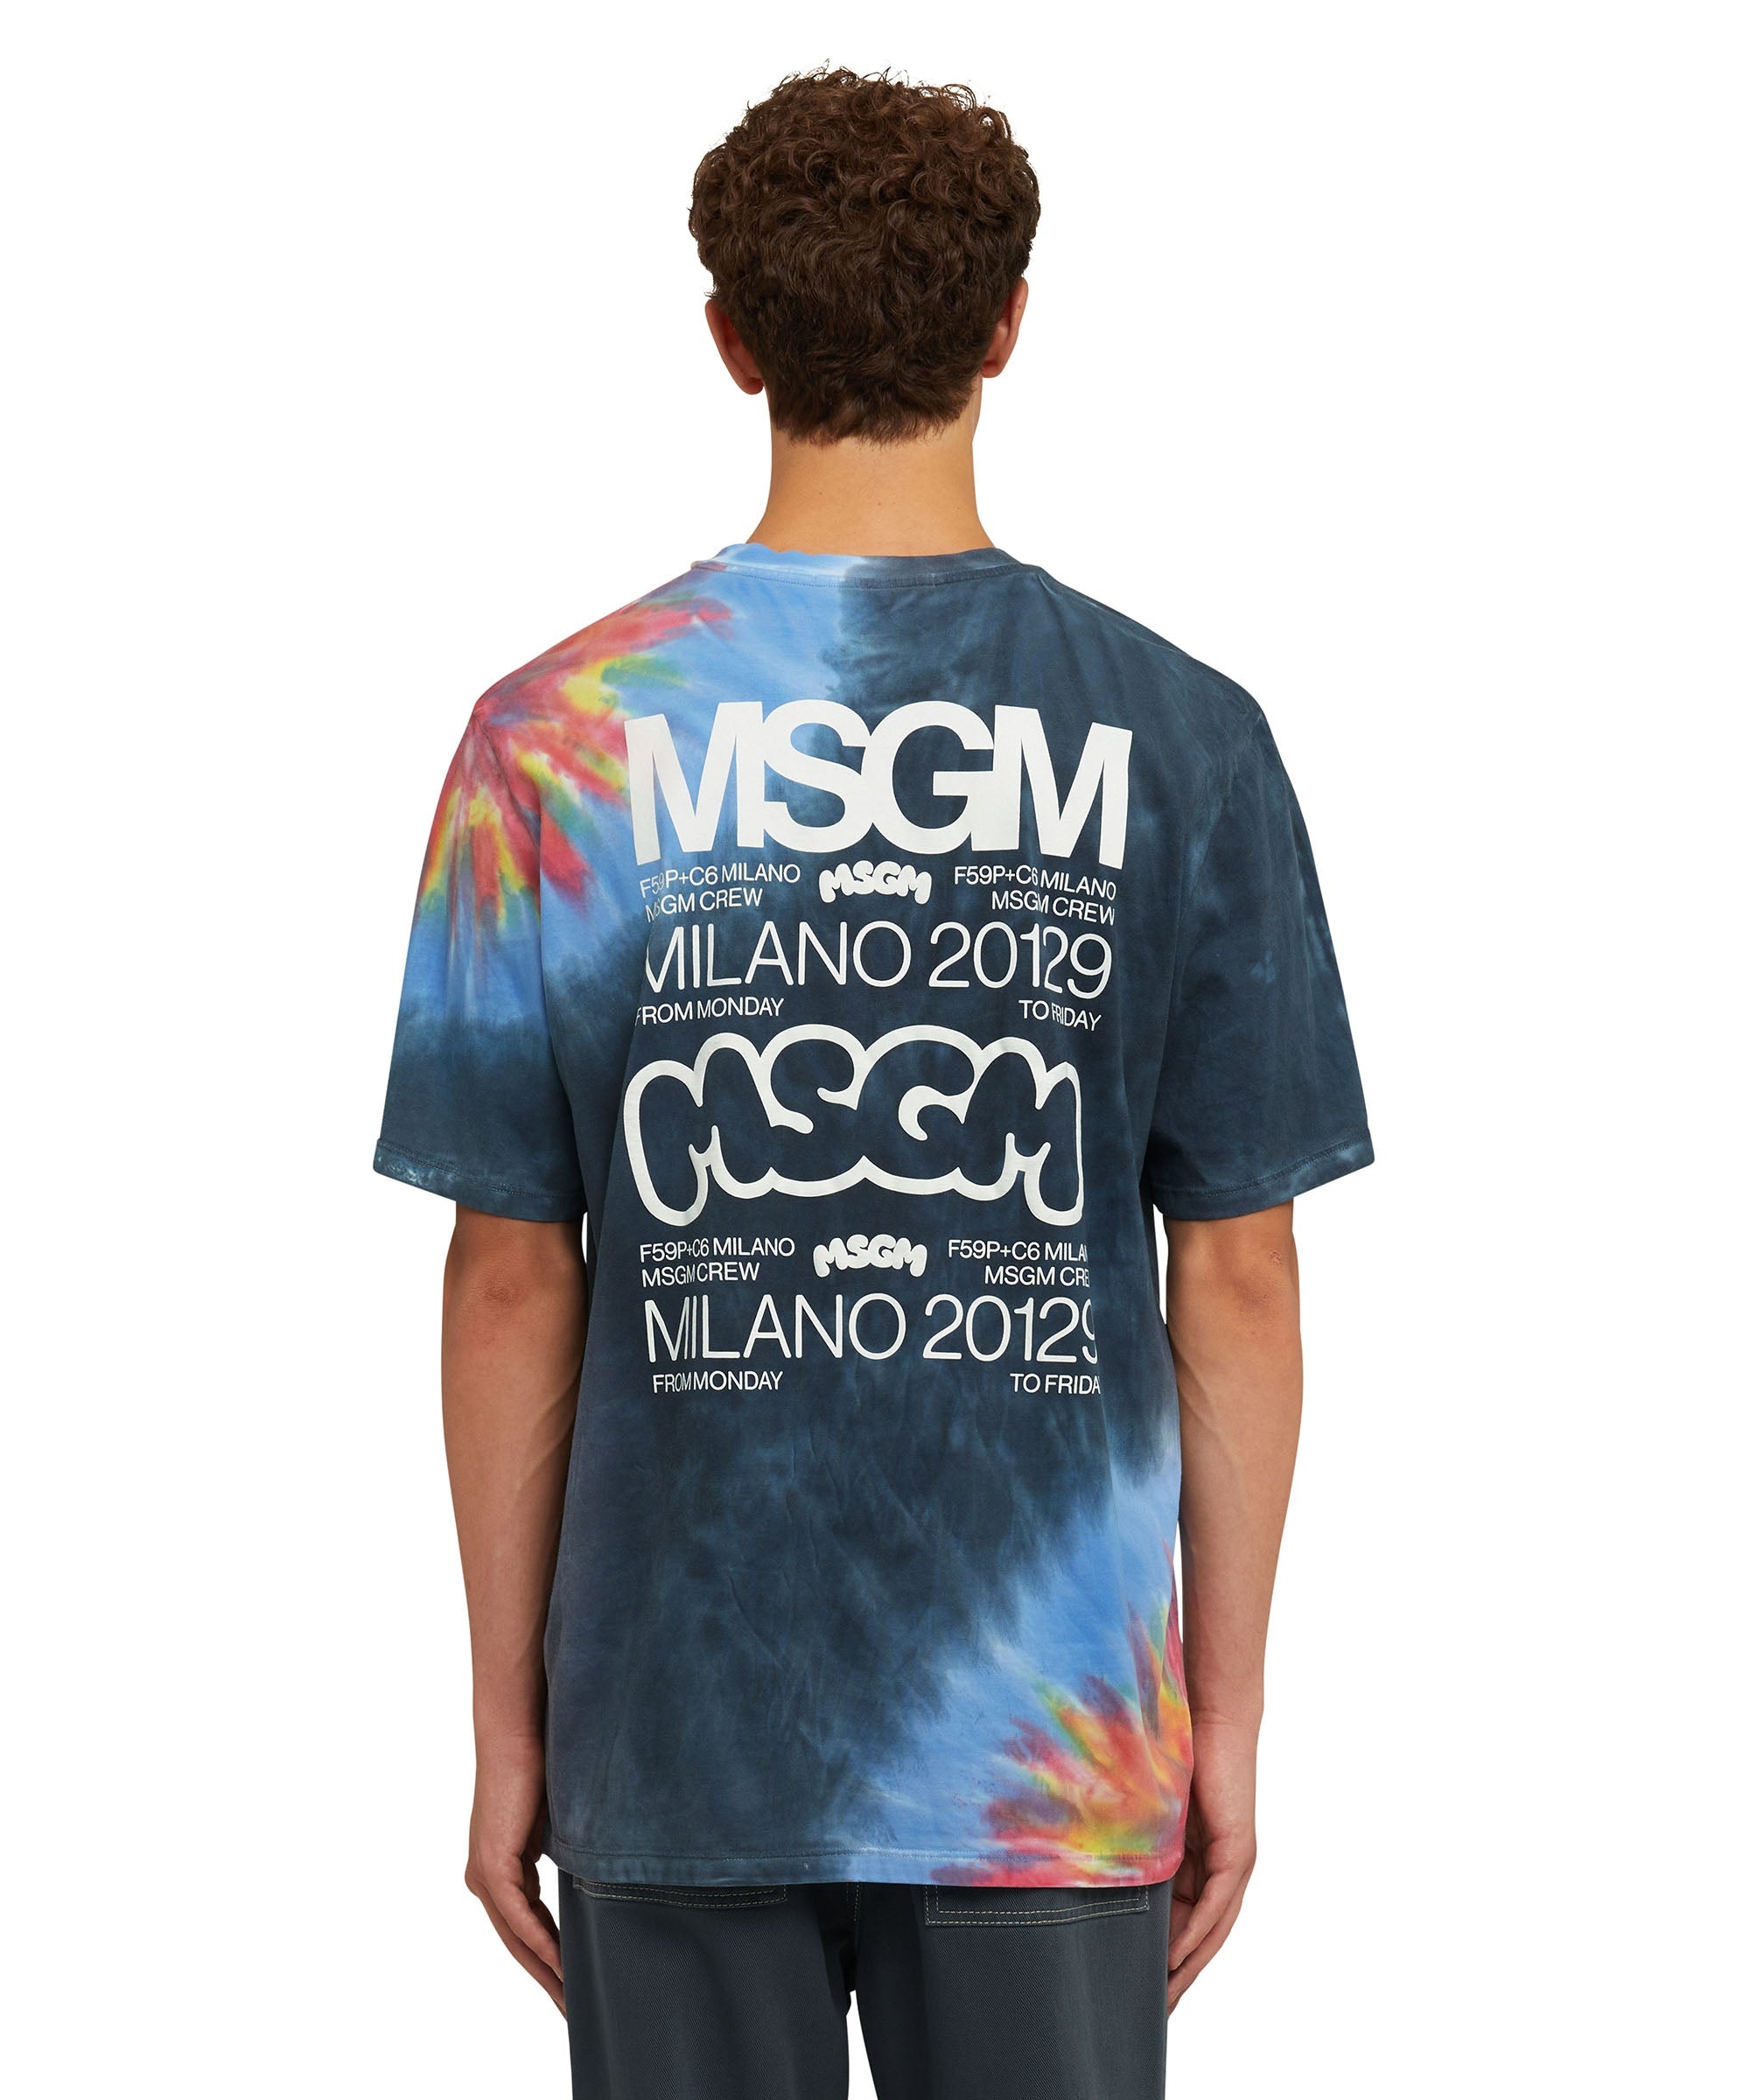 MSGM Tie dye cotton crewneck t-shirt with logo and graphics in